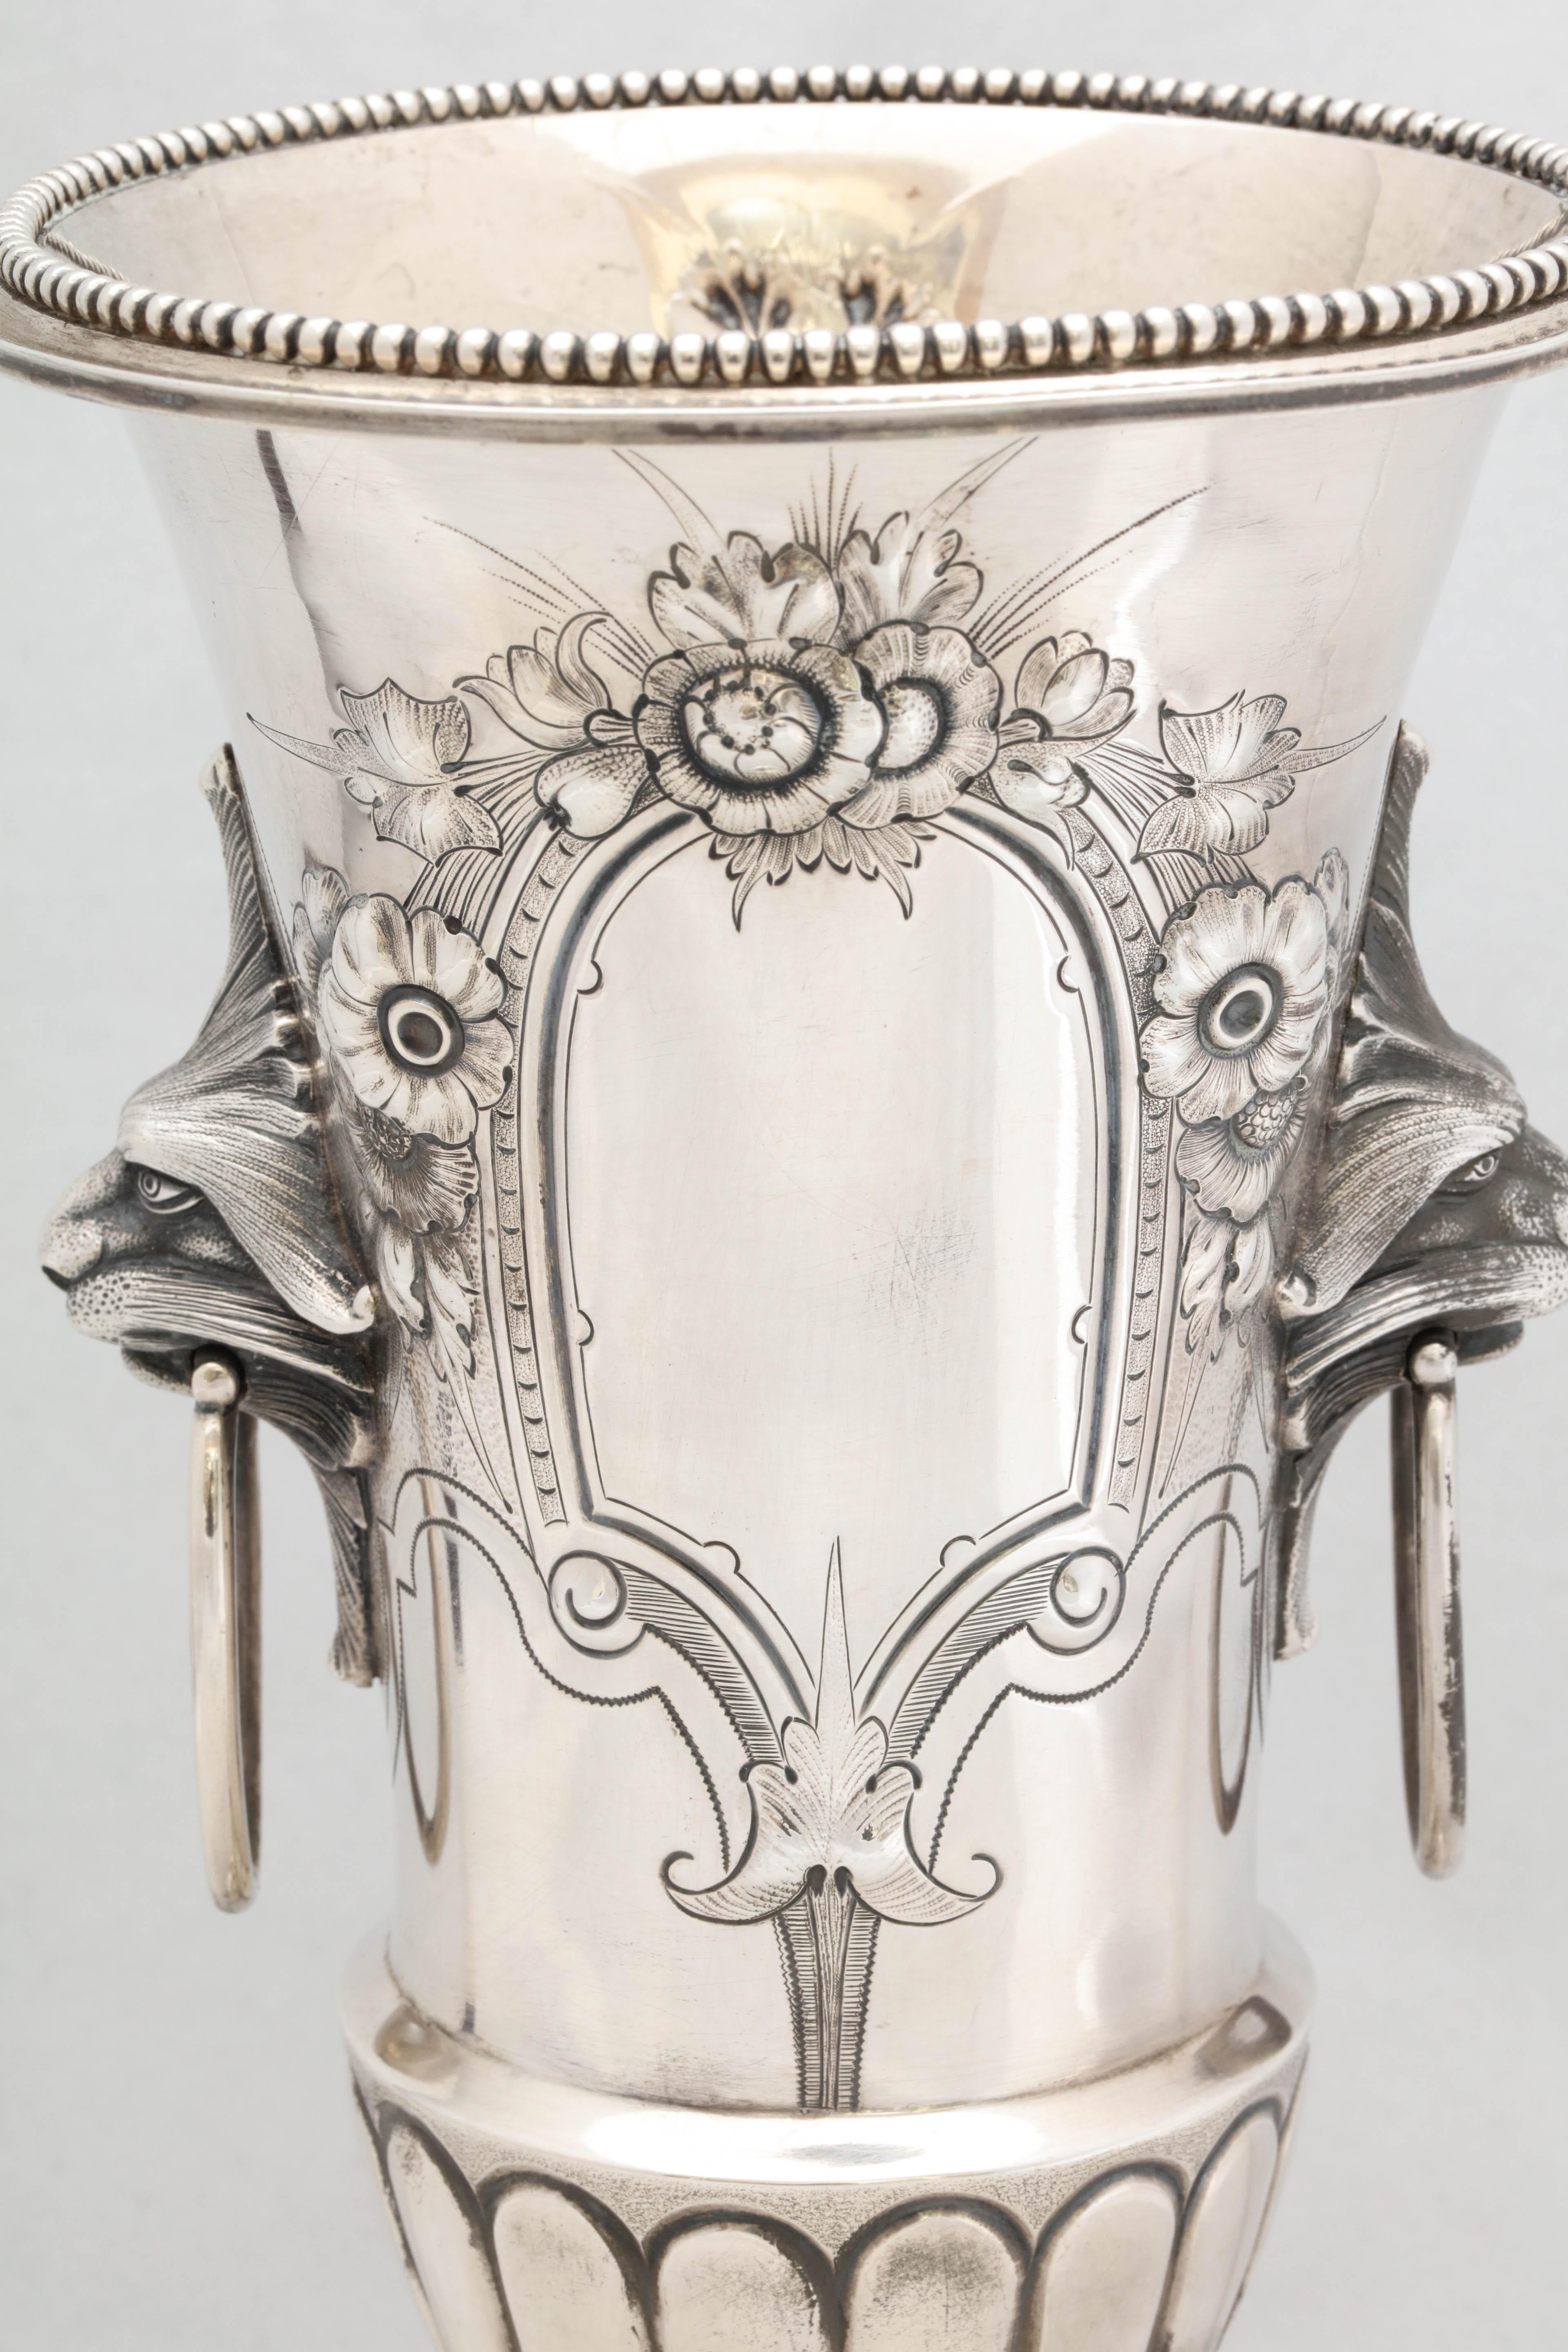 Late 19th Century Neoclassical Coin Silver Pedestal Based Vase by Wood & Hughes